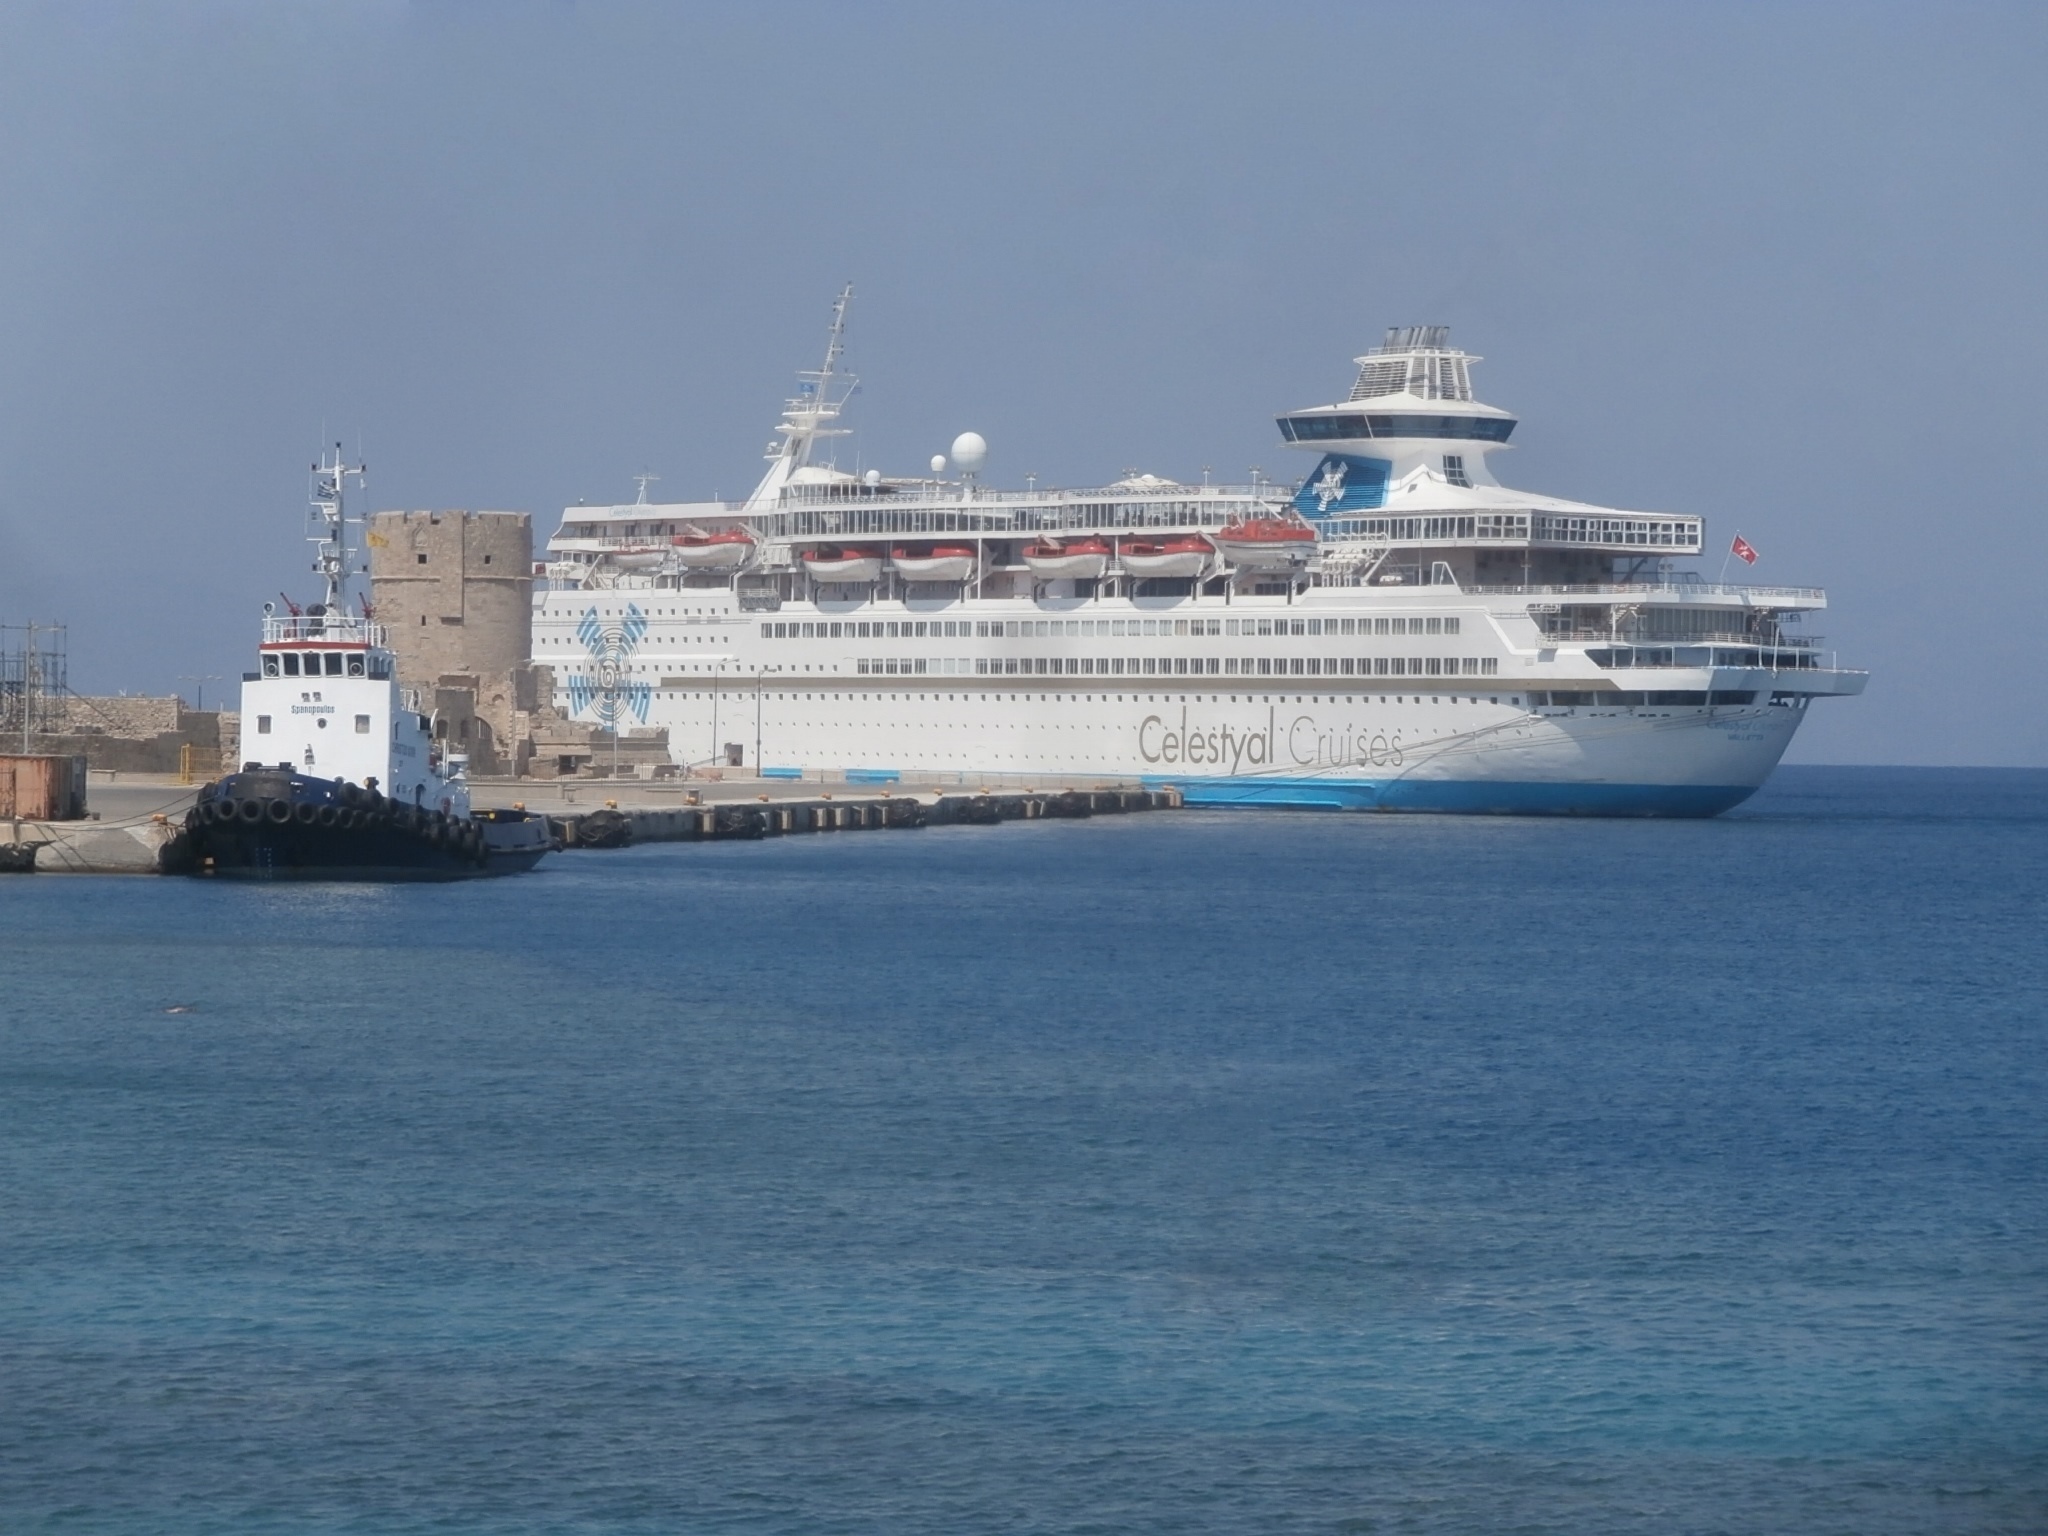 Wikimedia Commons (https://touristwire.com/wp-content/uploads/2023/05/Christos_XXVII_and_Celestyal_Olympia_moored_at_Quay_in_Port_of_Rhodes_4_September_2019.jpg)